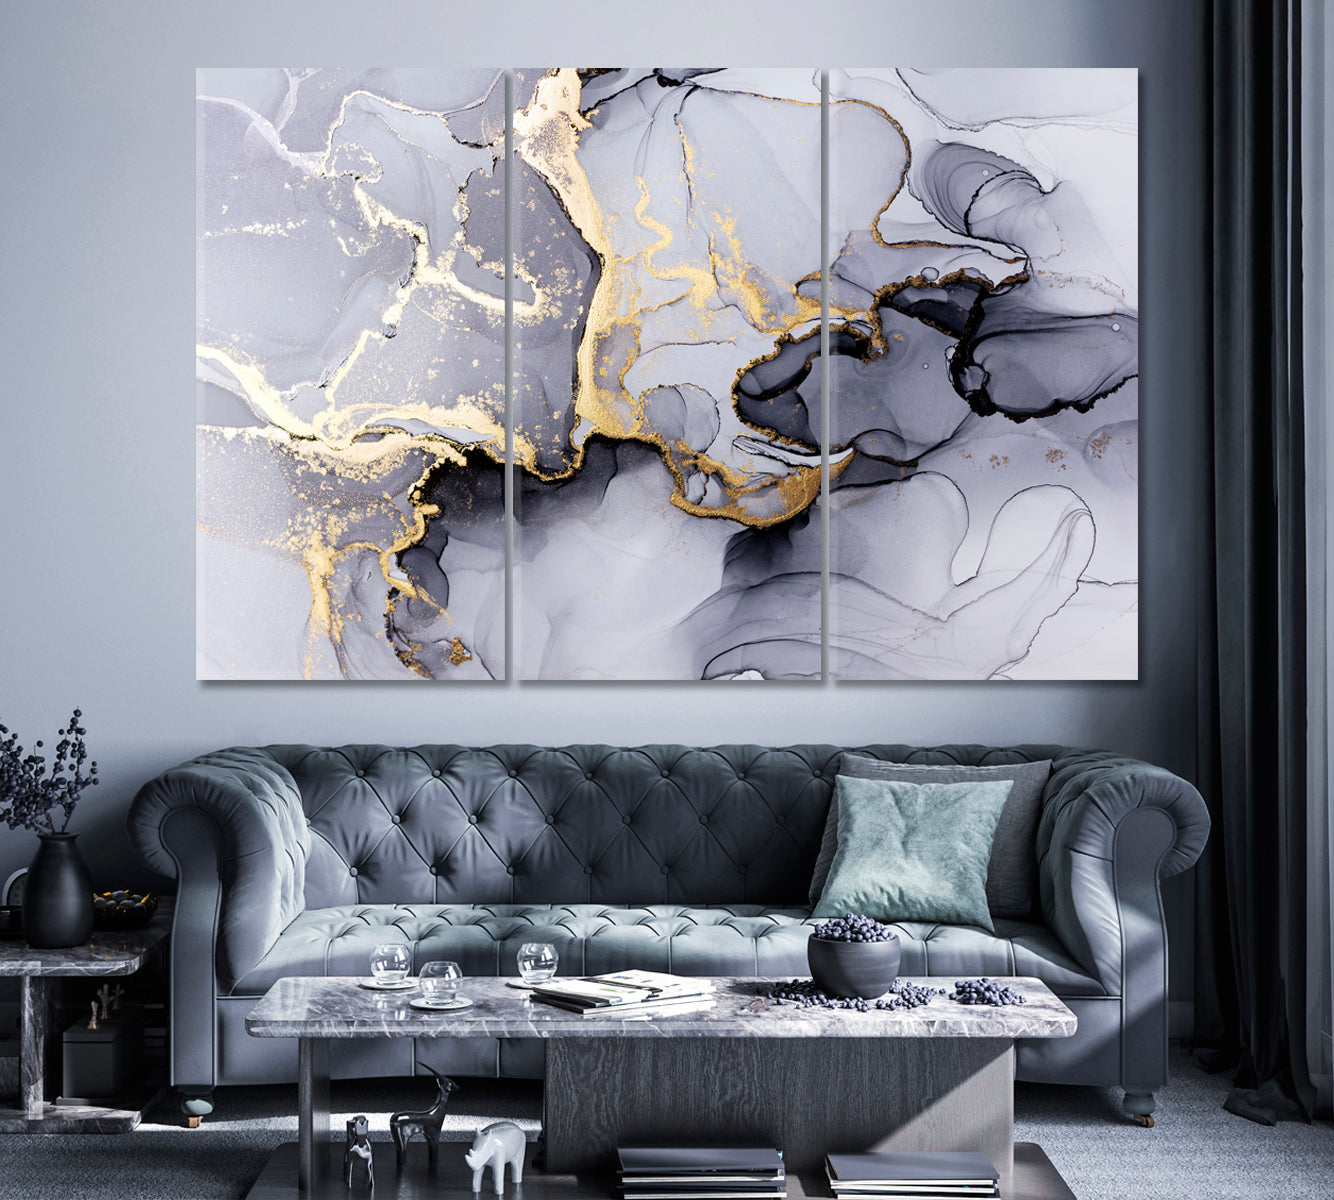 Liquid Gray Marble with Golden Veins Canvas Print ArtLexy 3 Panels 36"x24" inches 